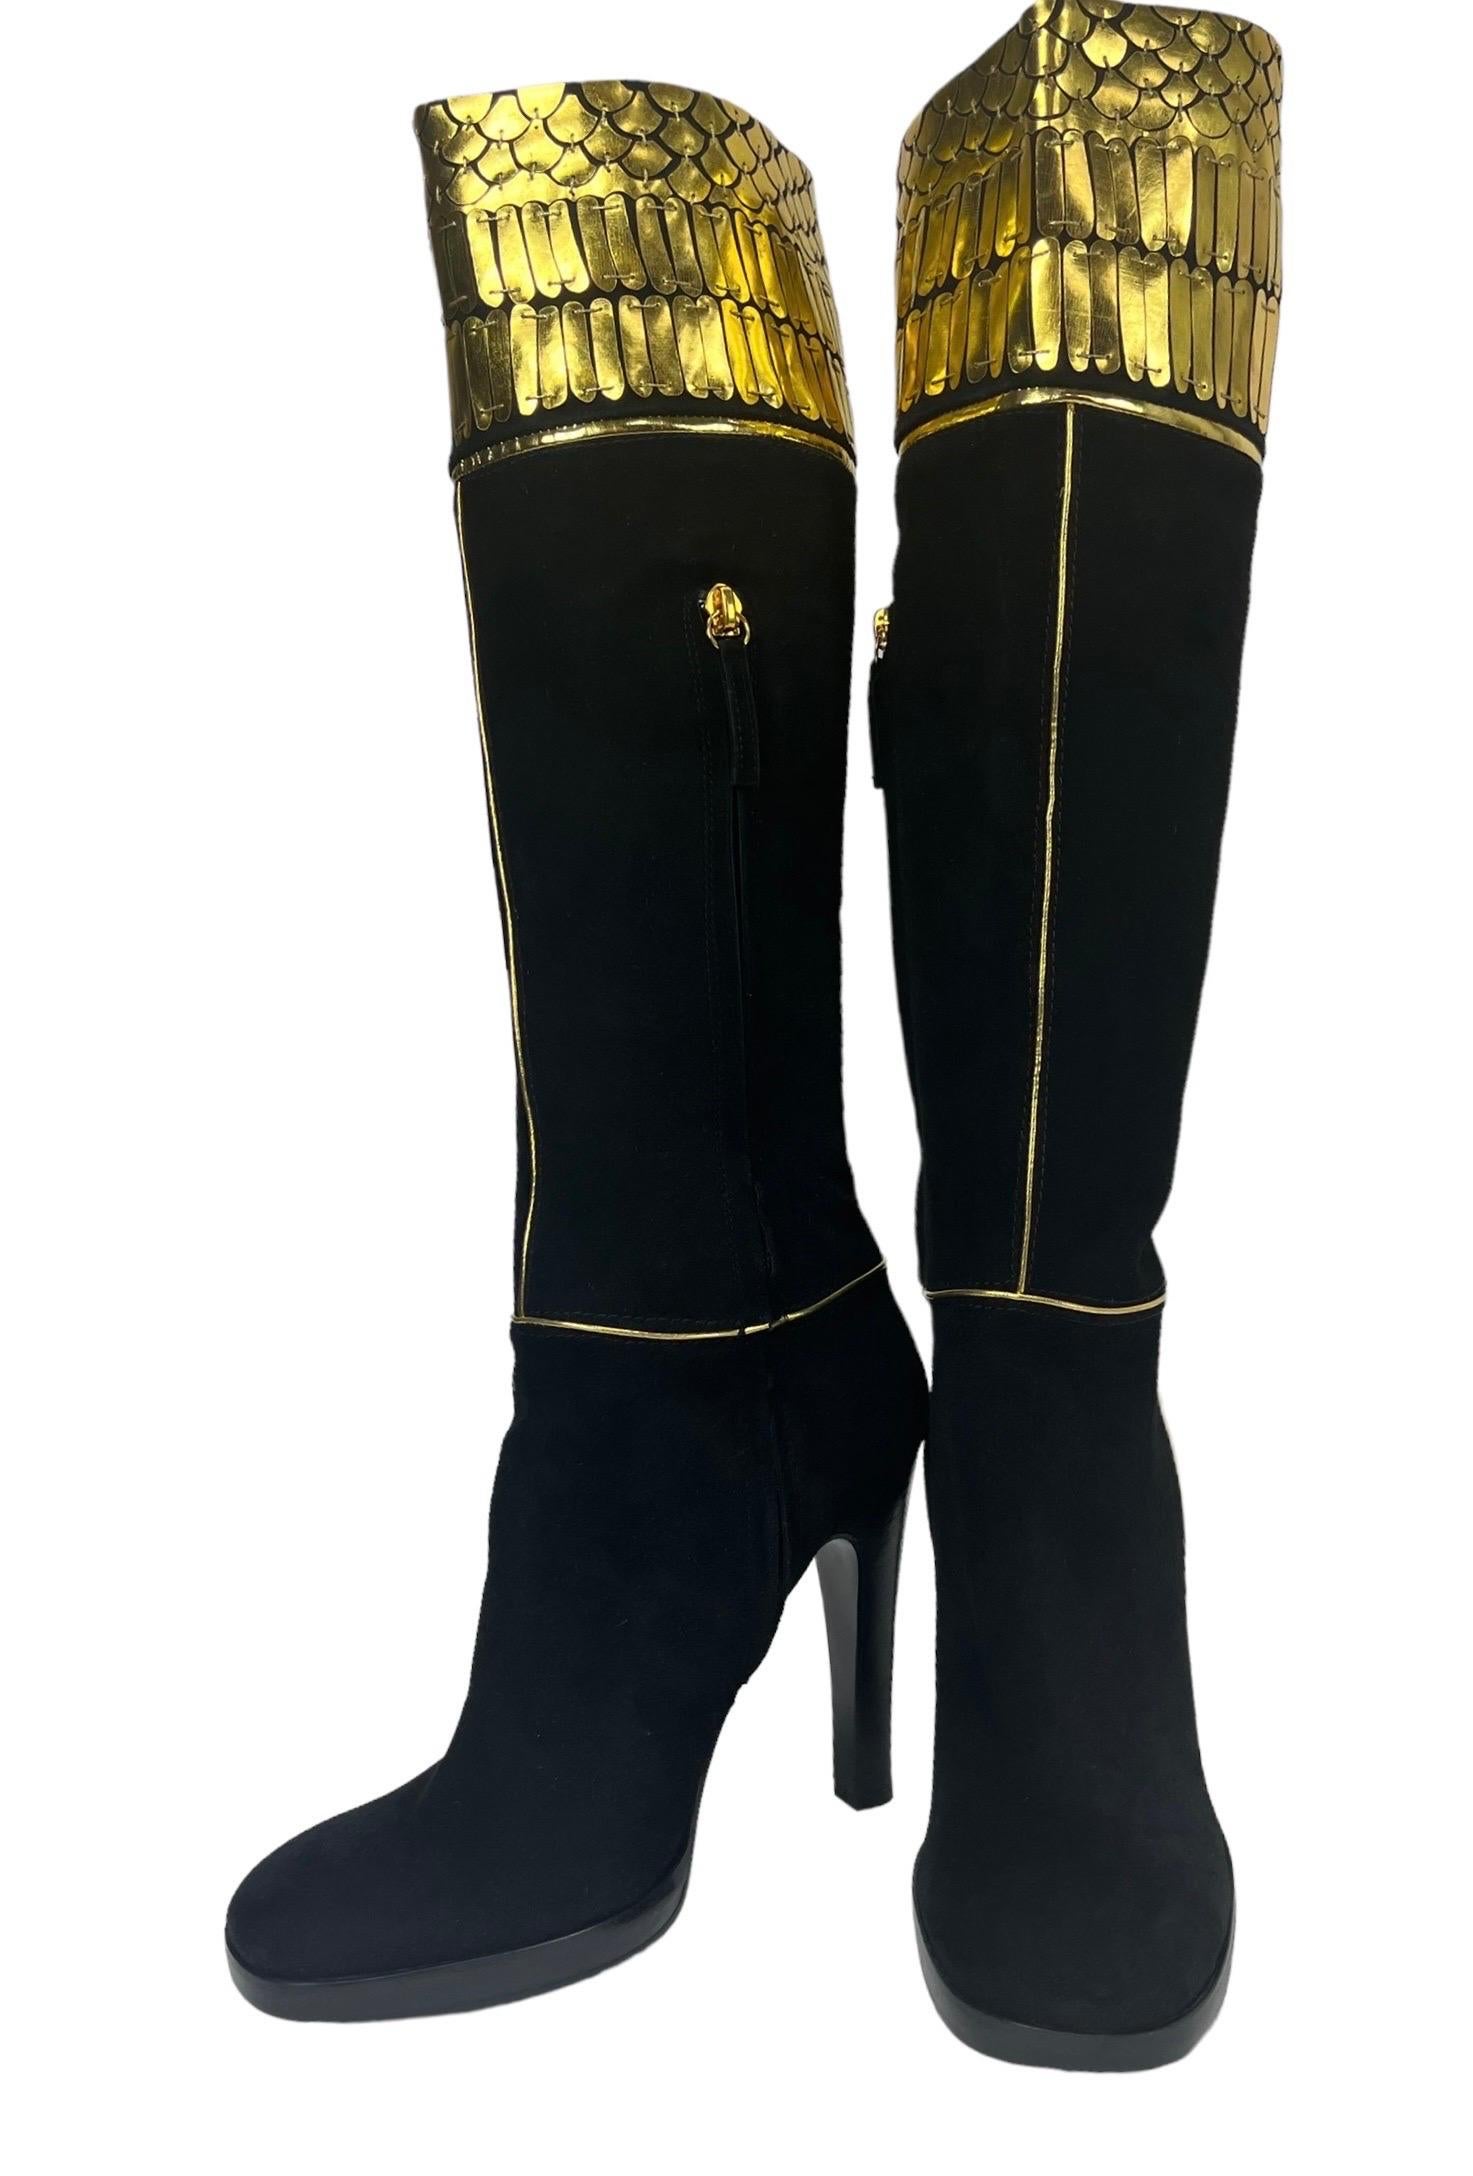 Roberto Cavalli Black Suede Leather Knee Length Boots
Italian sizes available: 38.5 ( US 8.5 ) and 41 ( US 11 )
Black color, 100% Leather upper, Gold Leather applique, Zip for easy on/off.
lining: Smooth 100% leather,  Heel height: 4.75